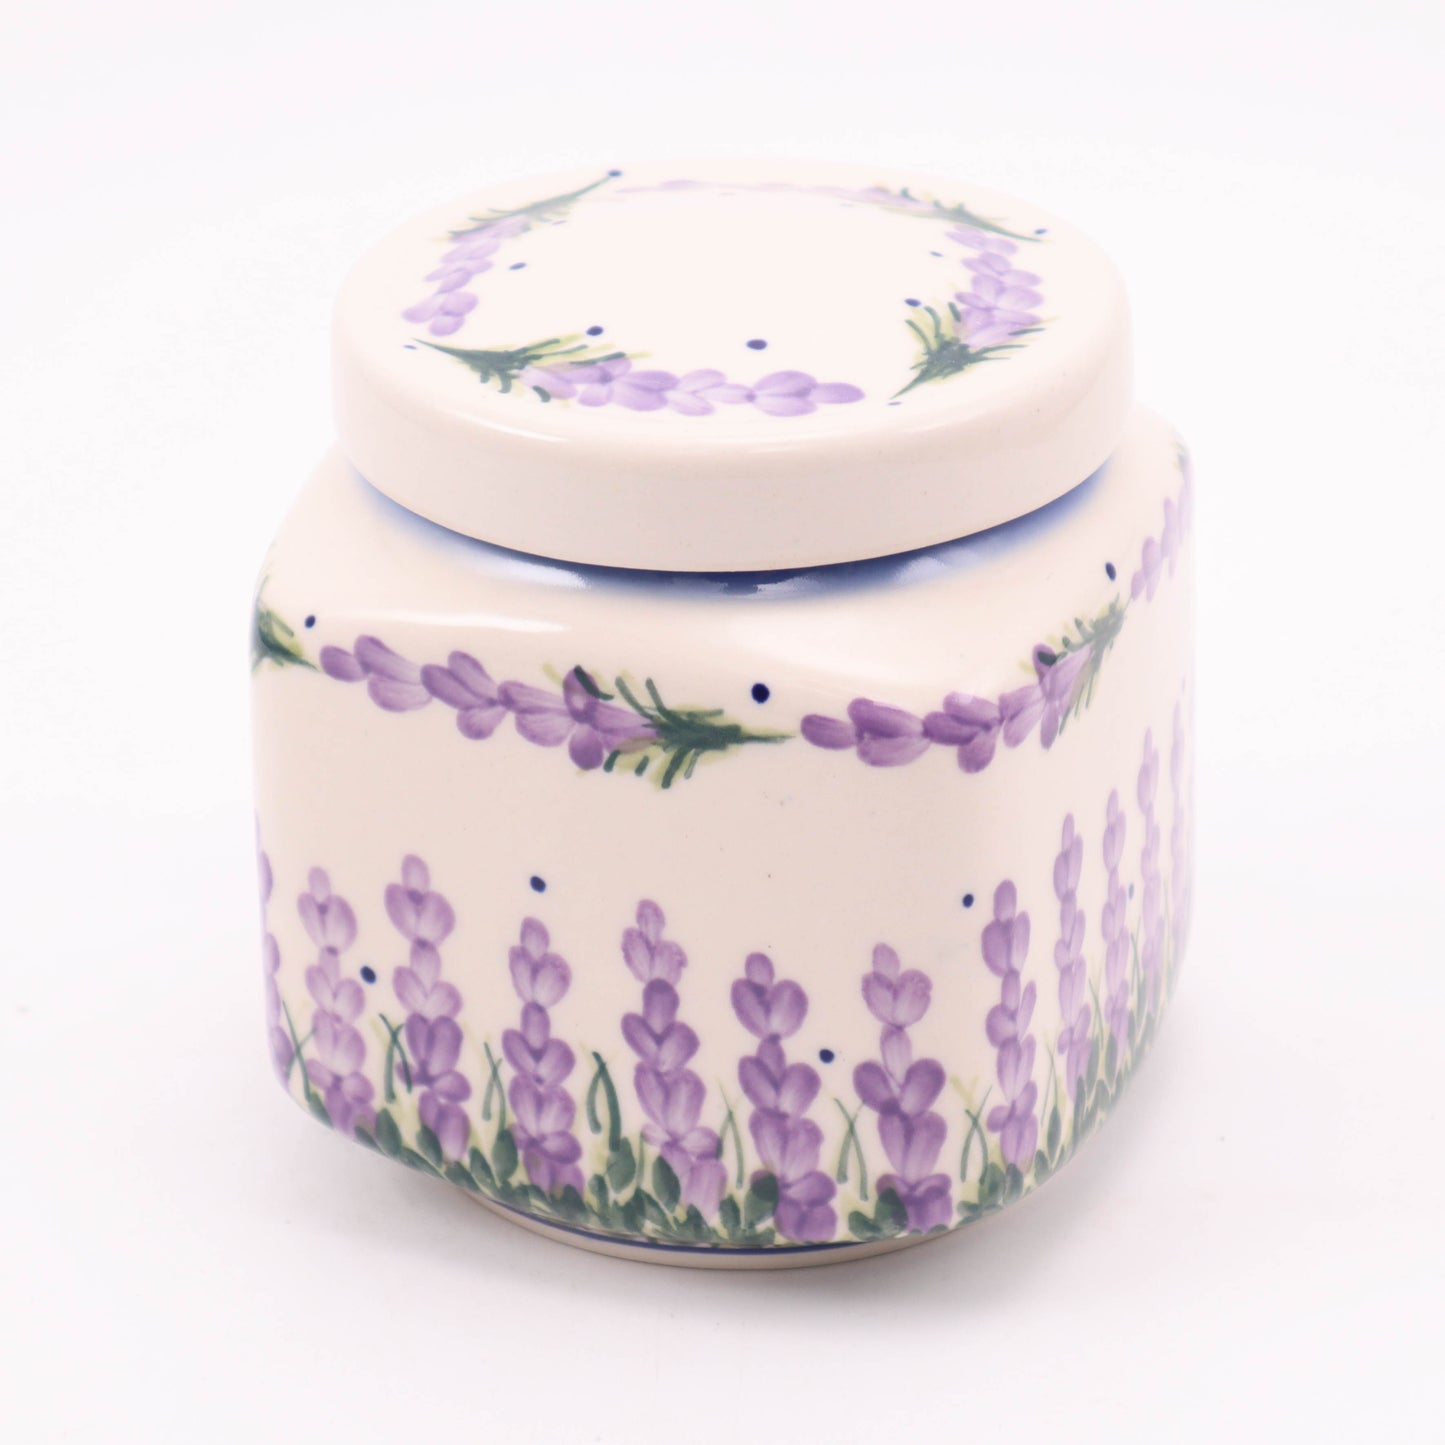 5"x5" Square Canister with Lid. Pattern: Lavender Dreams